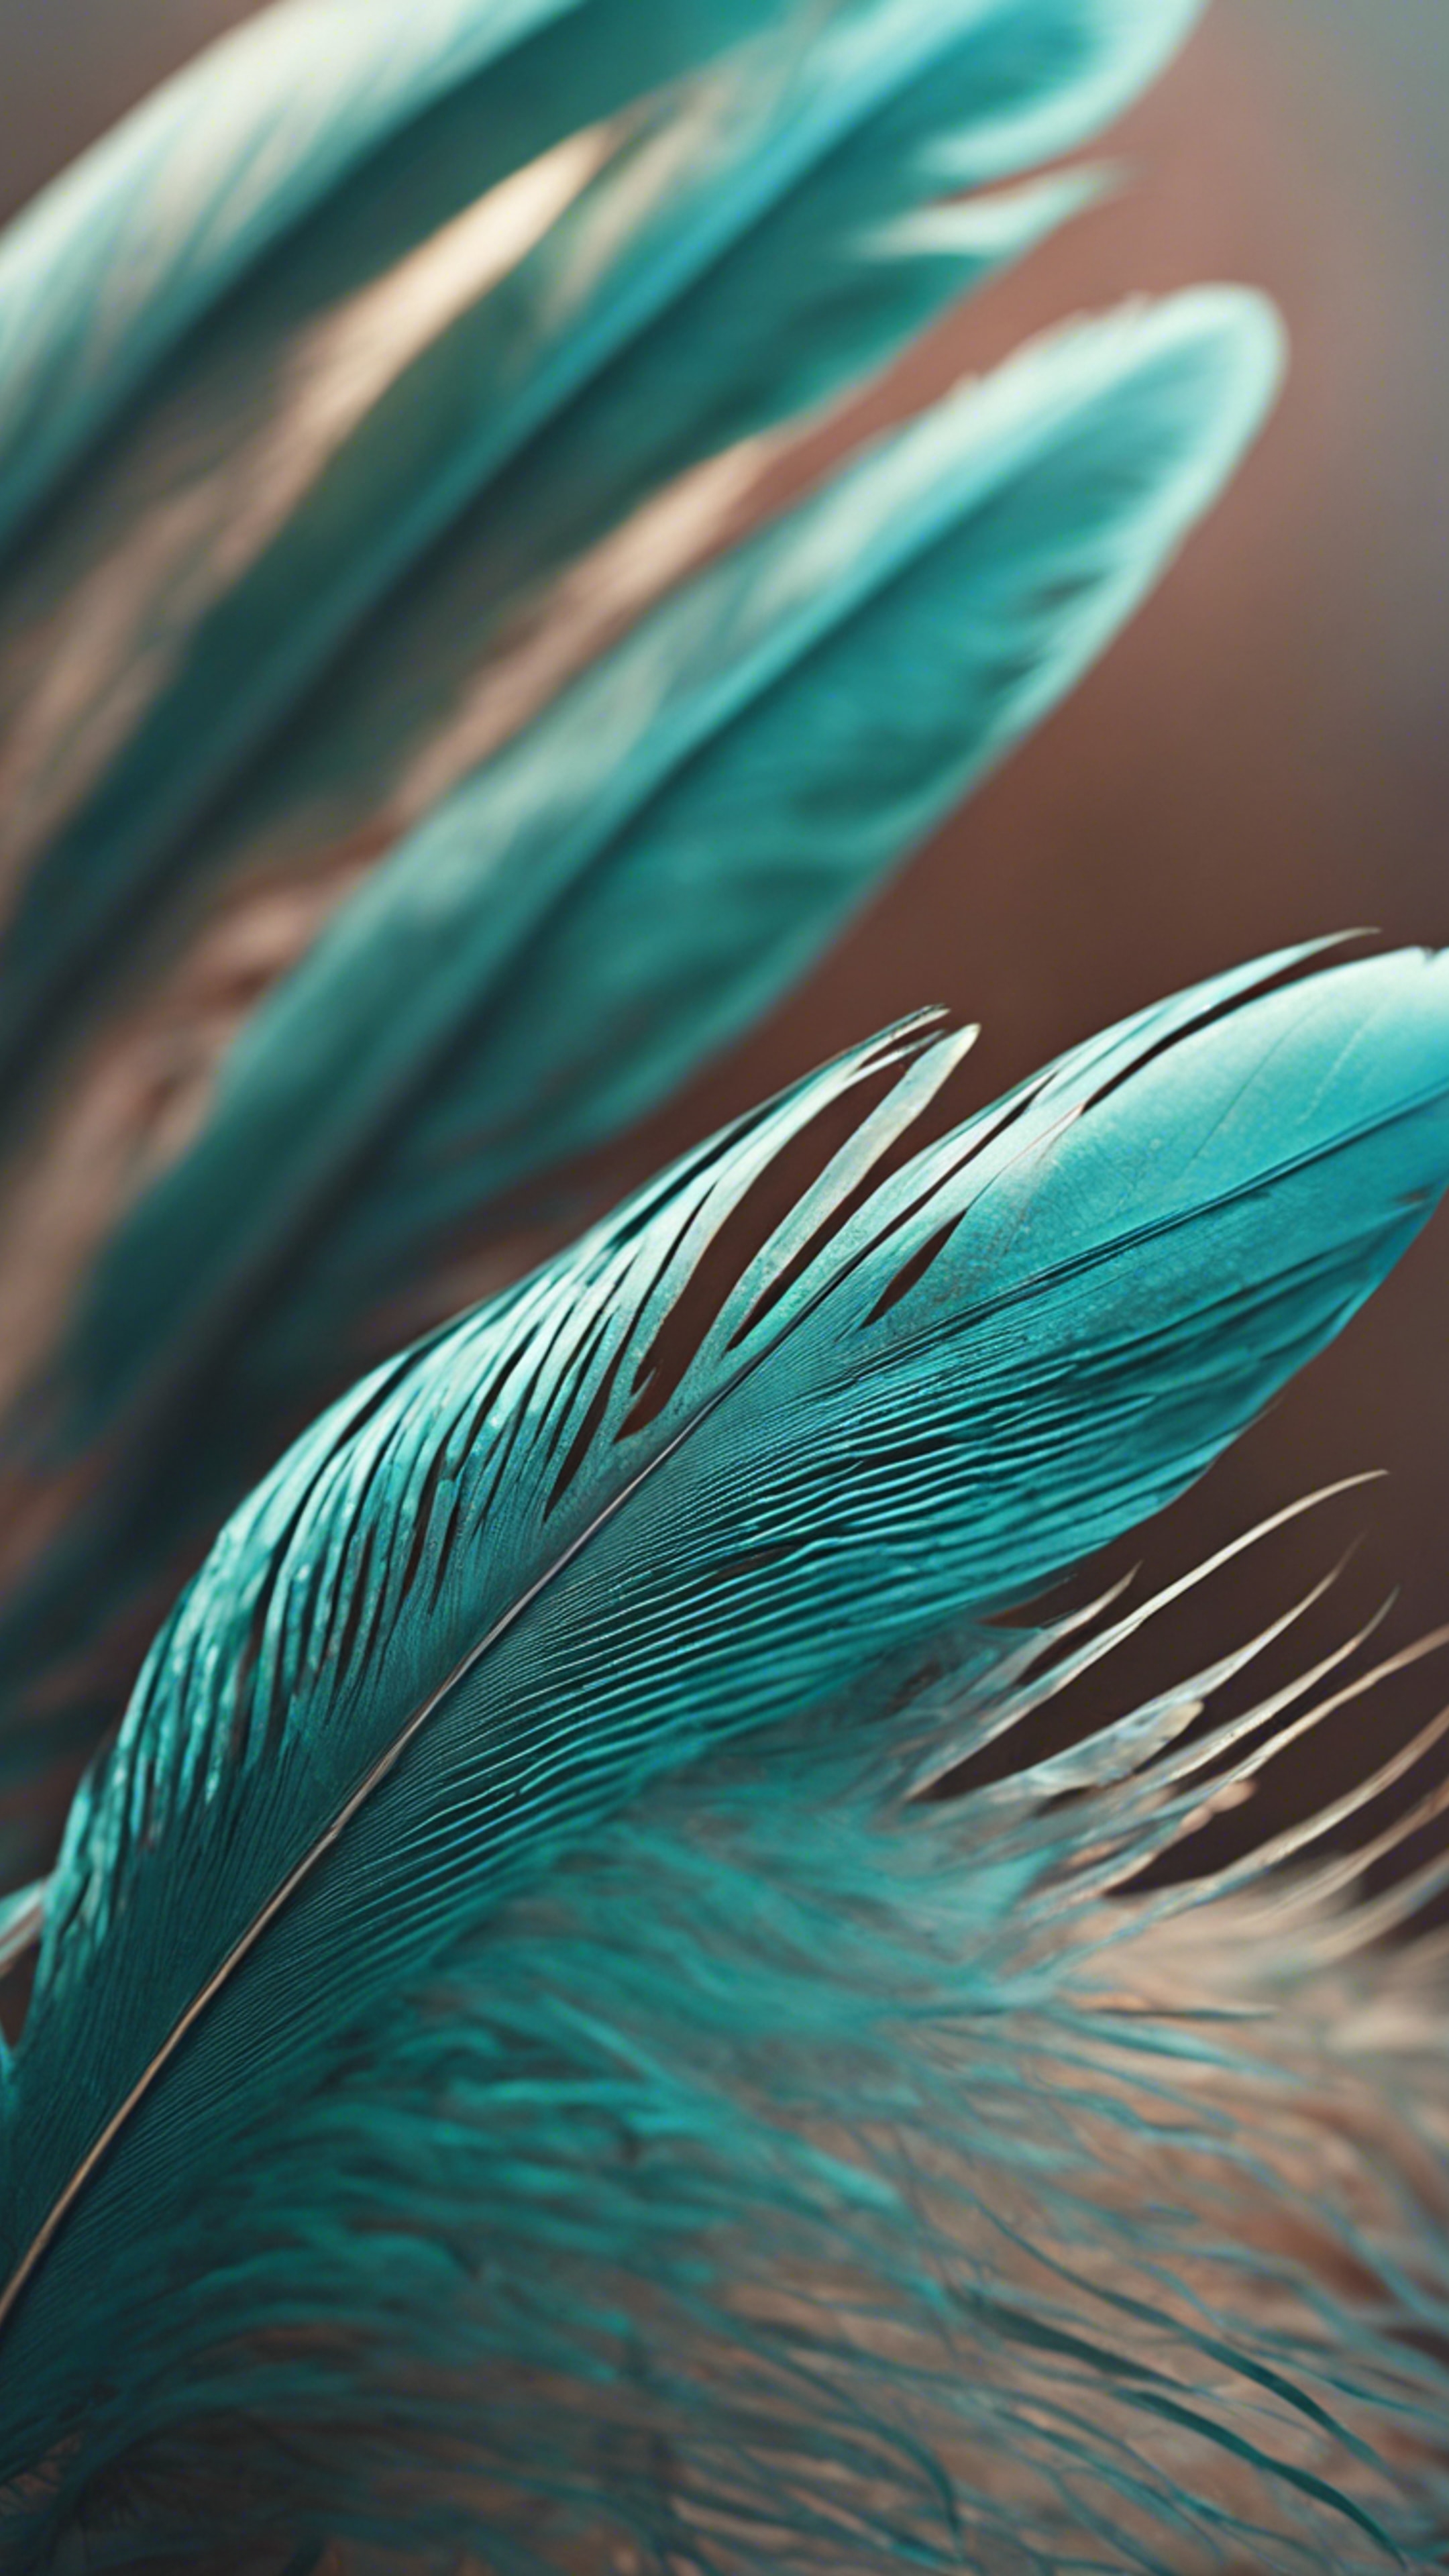 A close-up view of an exotic cool teal-colored birds' feather. Behang[44d0beeee9f542d4ae1e]